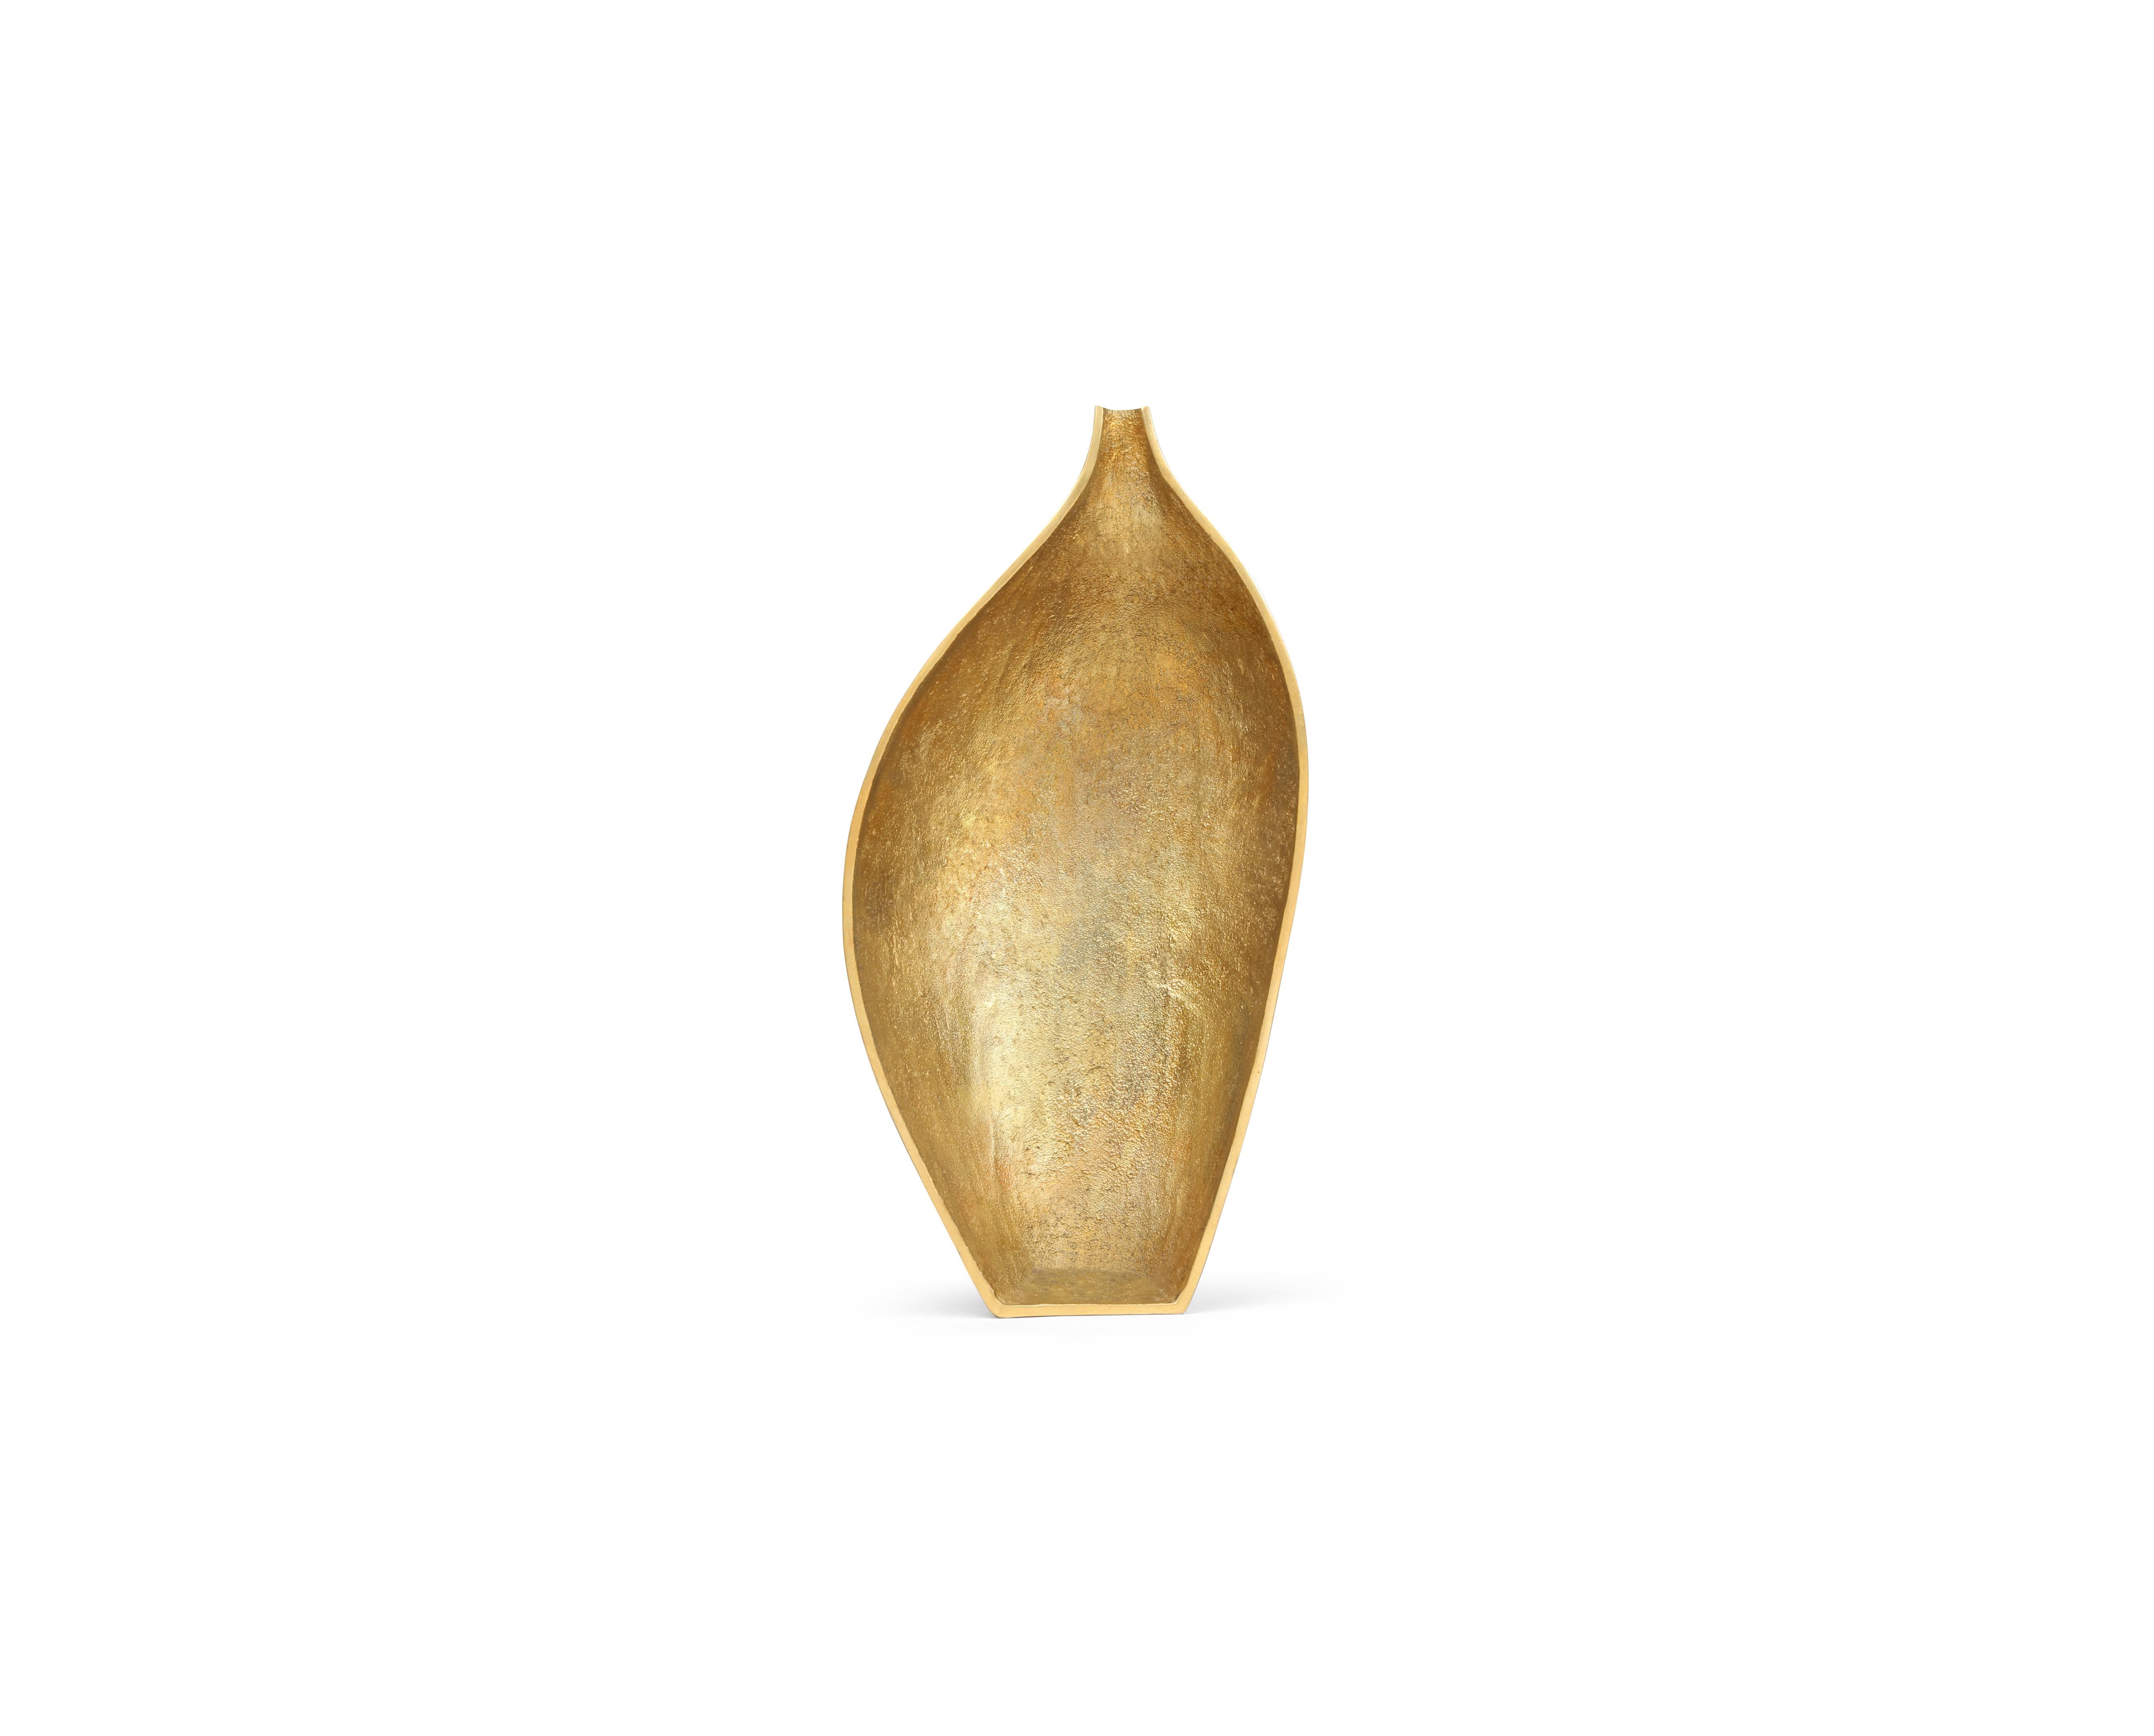 Kinzo hand cast decorative sculpture by Madheke.
Dimensions: W 14.2 x D 7.5 x H 27.5 cm.
Materials: Metal.

KINZO’s eye-catching curves and structure are crafted in a shined cast brass with an ultra-polished rim making it the perfect accent